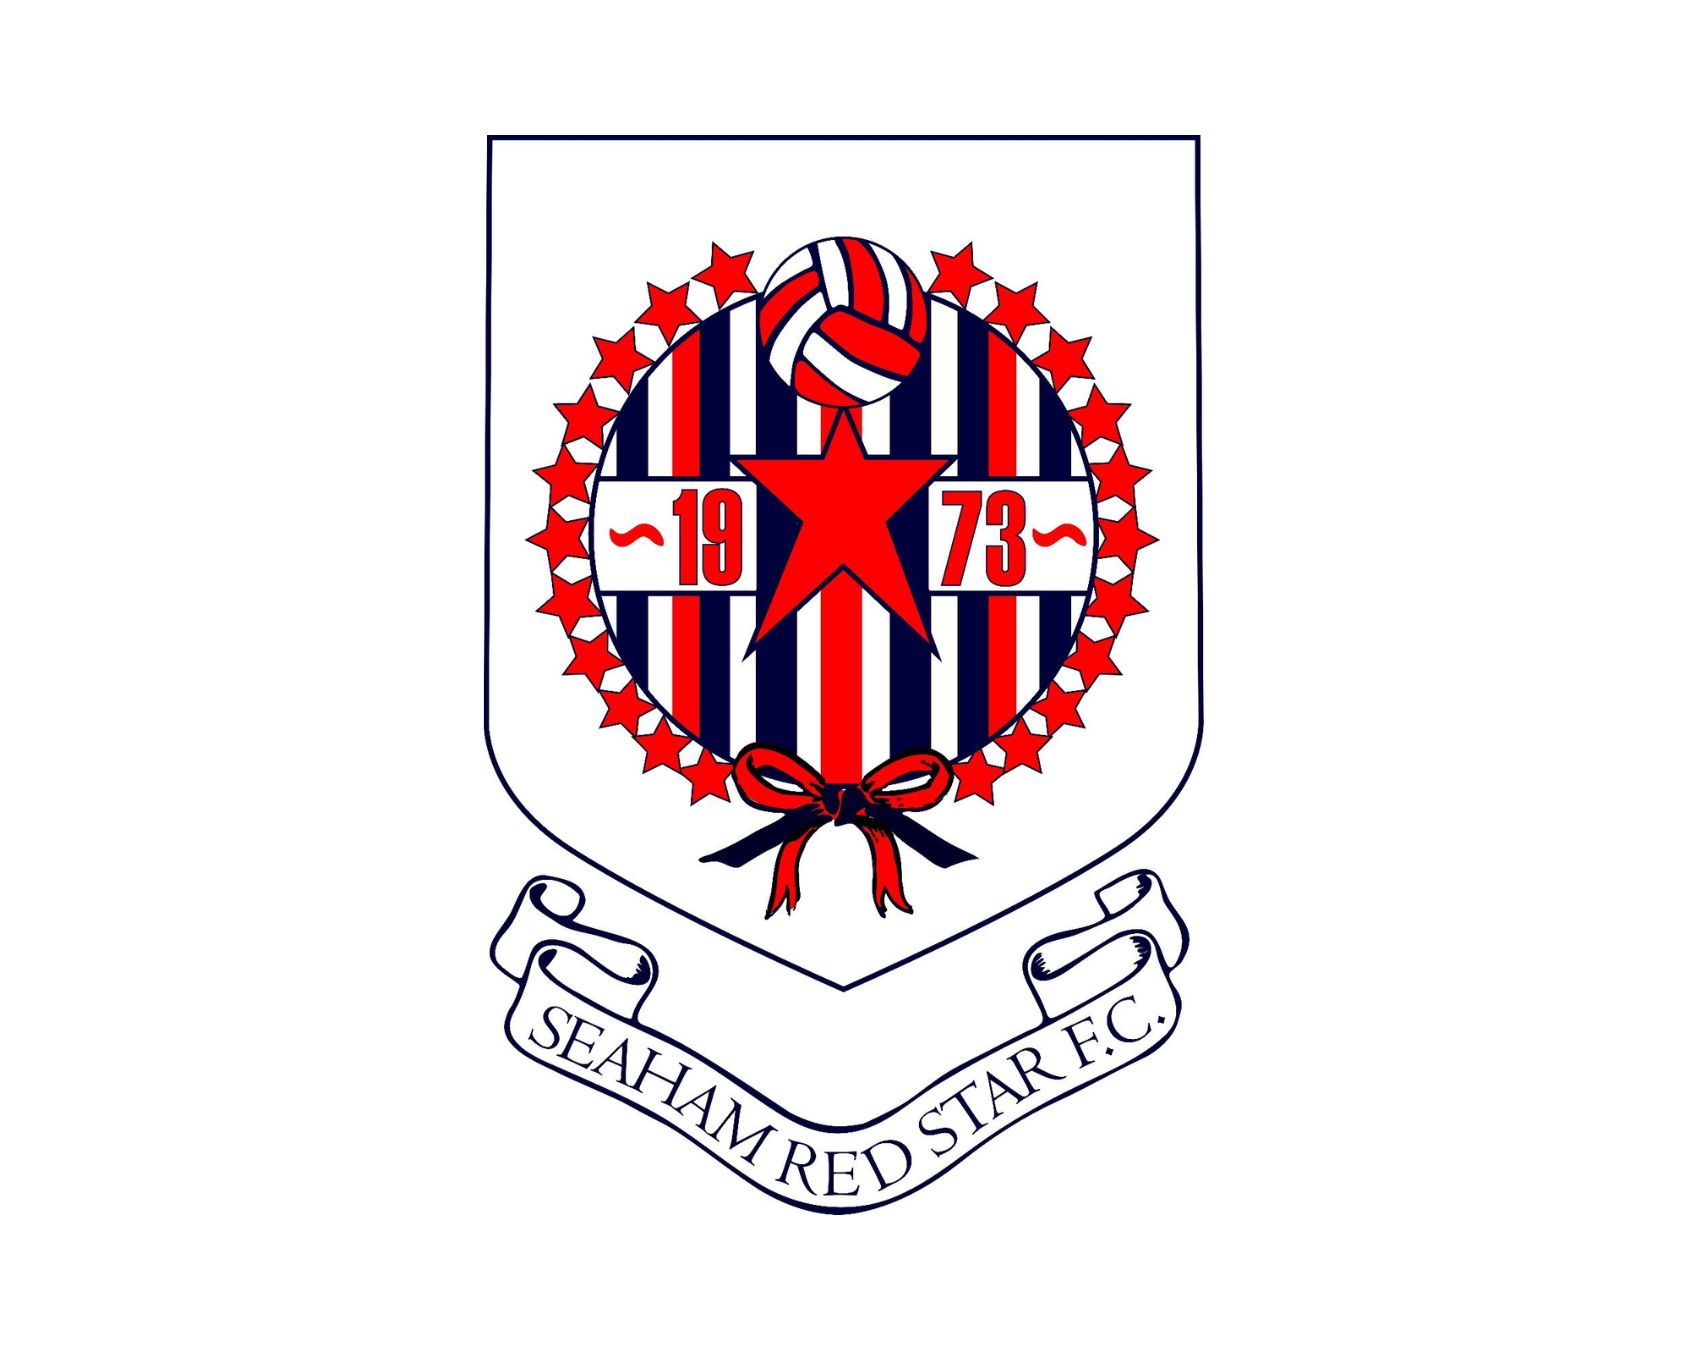 seaham-red-star-fc-25-football-club-facts